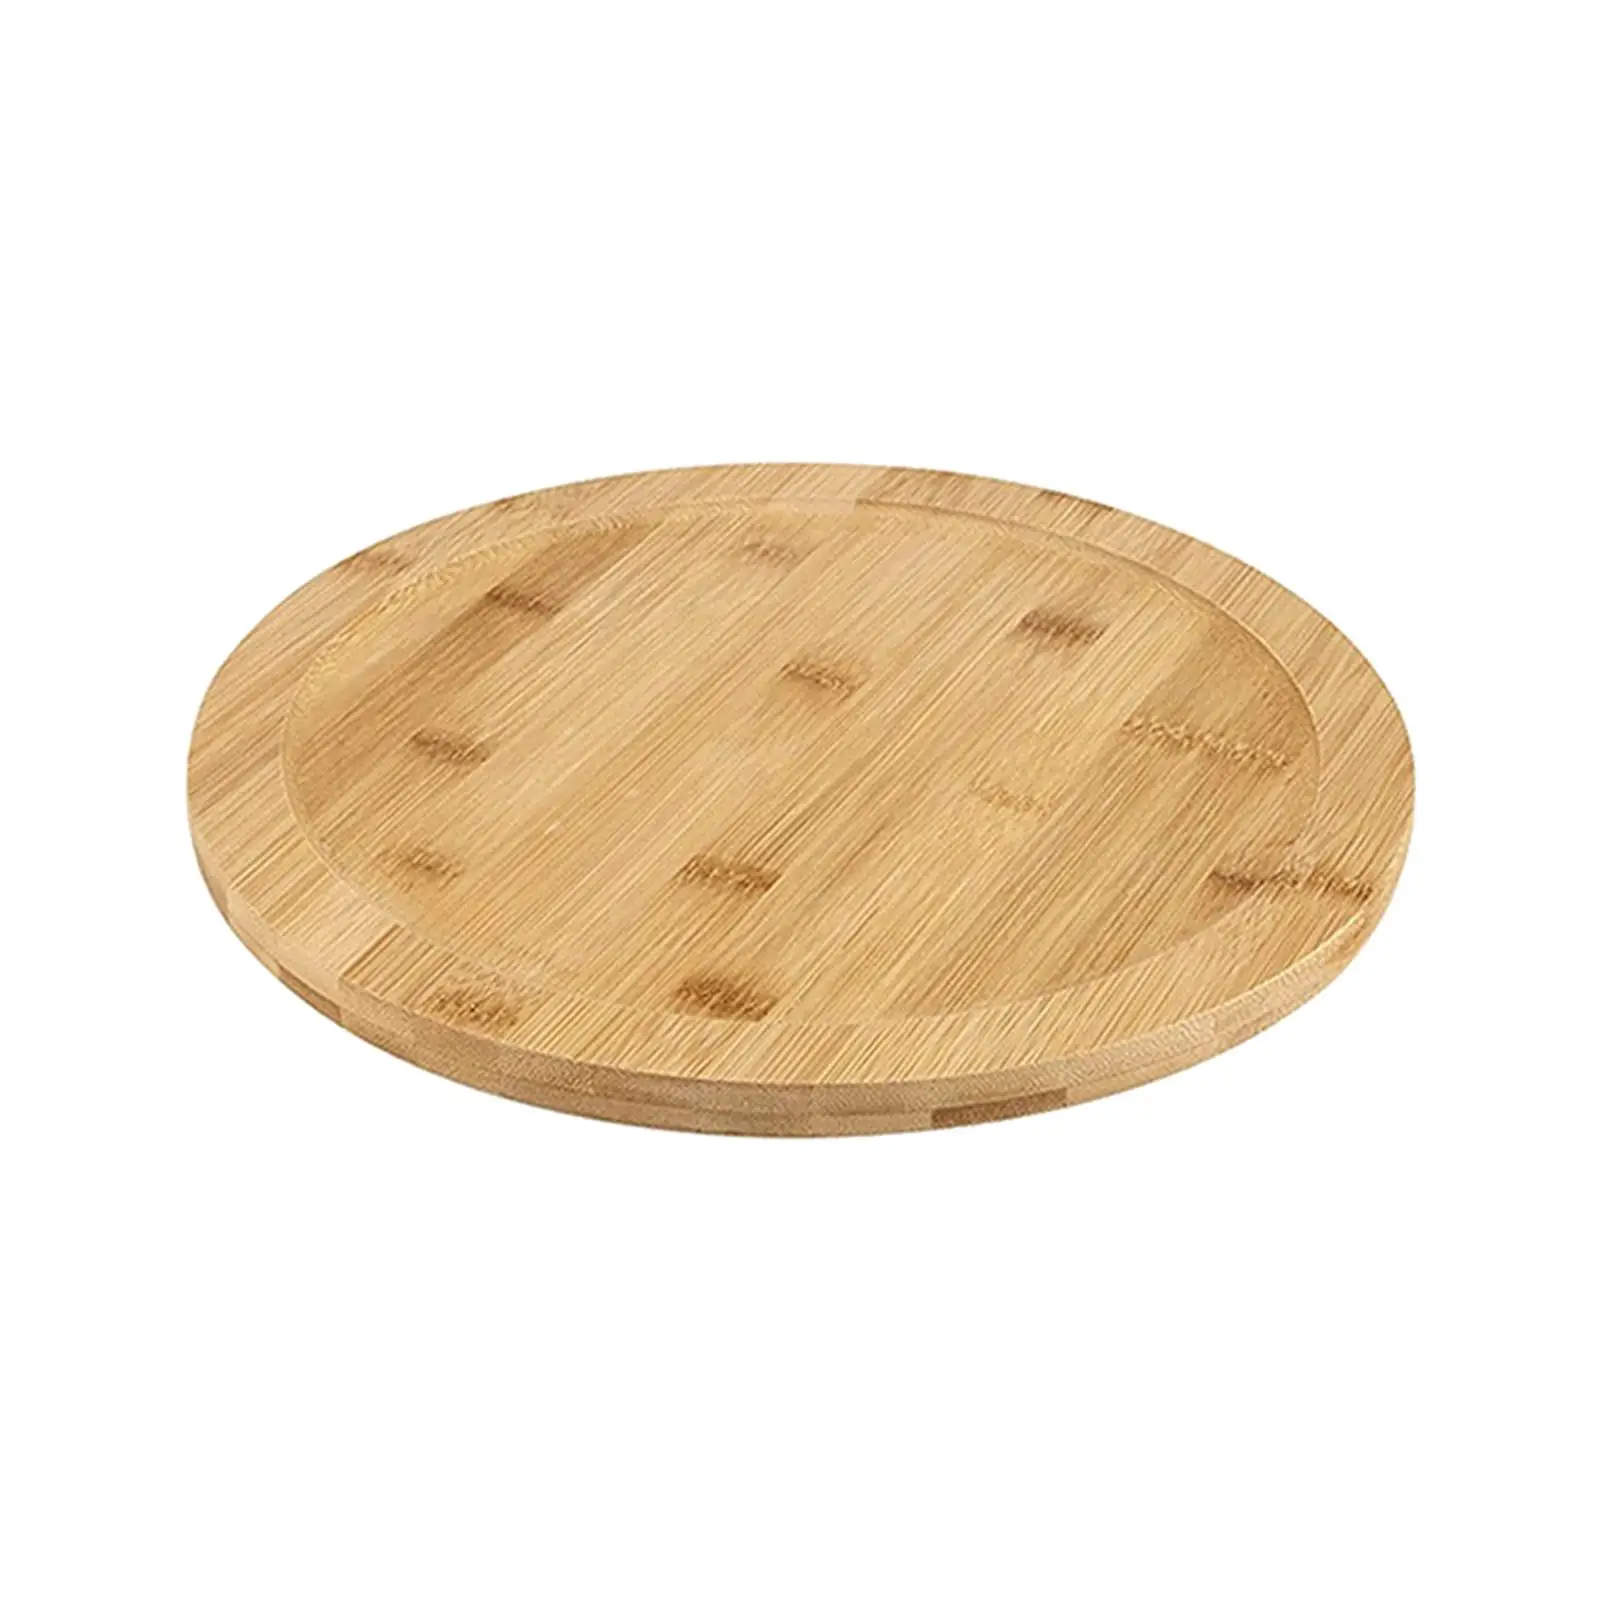 Serving Plate Swivel Plate Cake Stand Wooden Round Rotating Plate for Home Pantry Cabinet Kitchen Countertop Dining Table